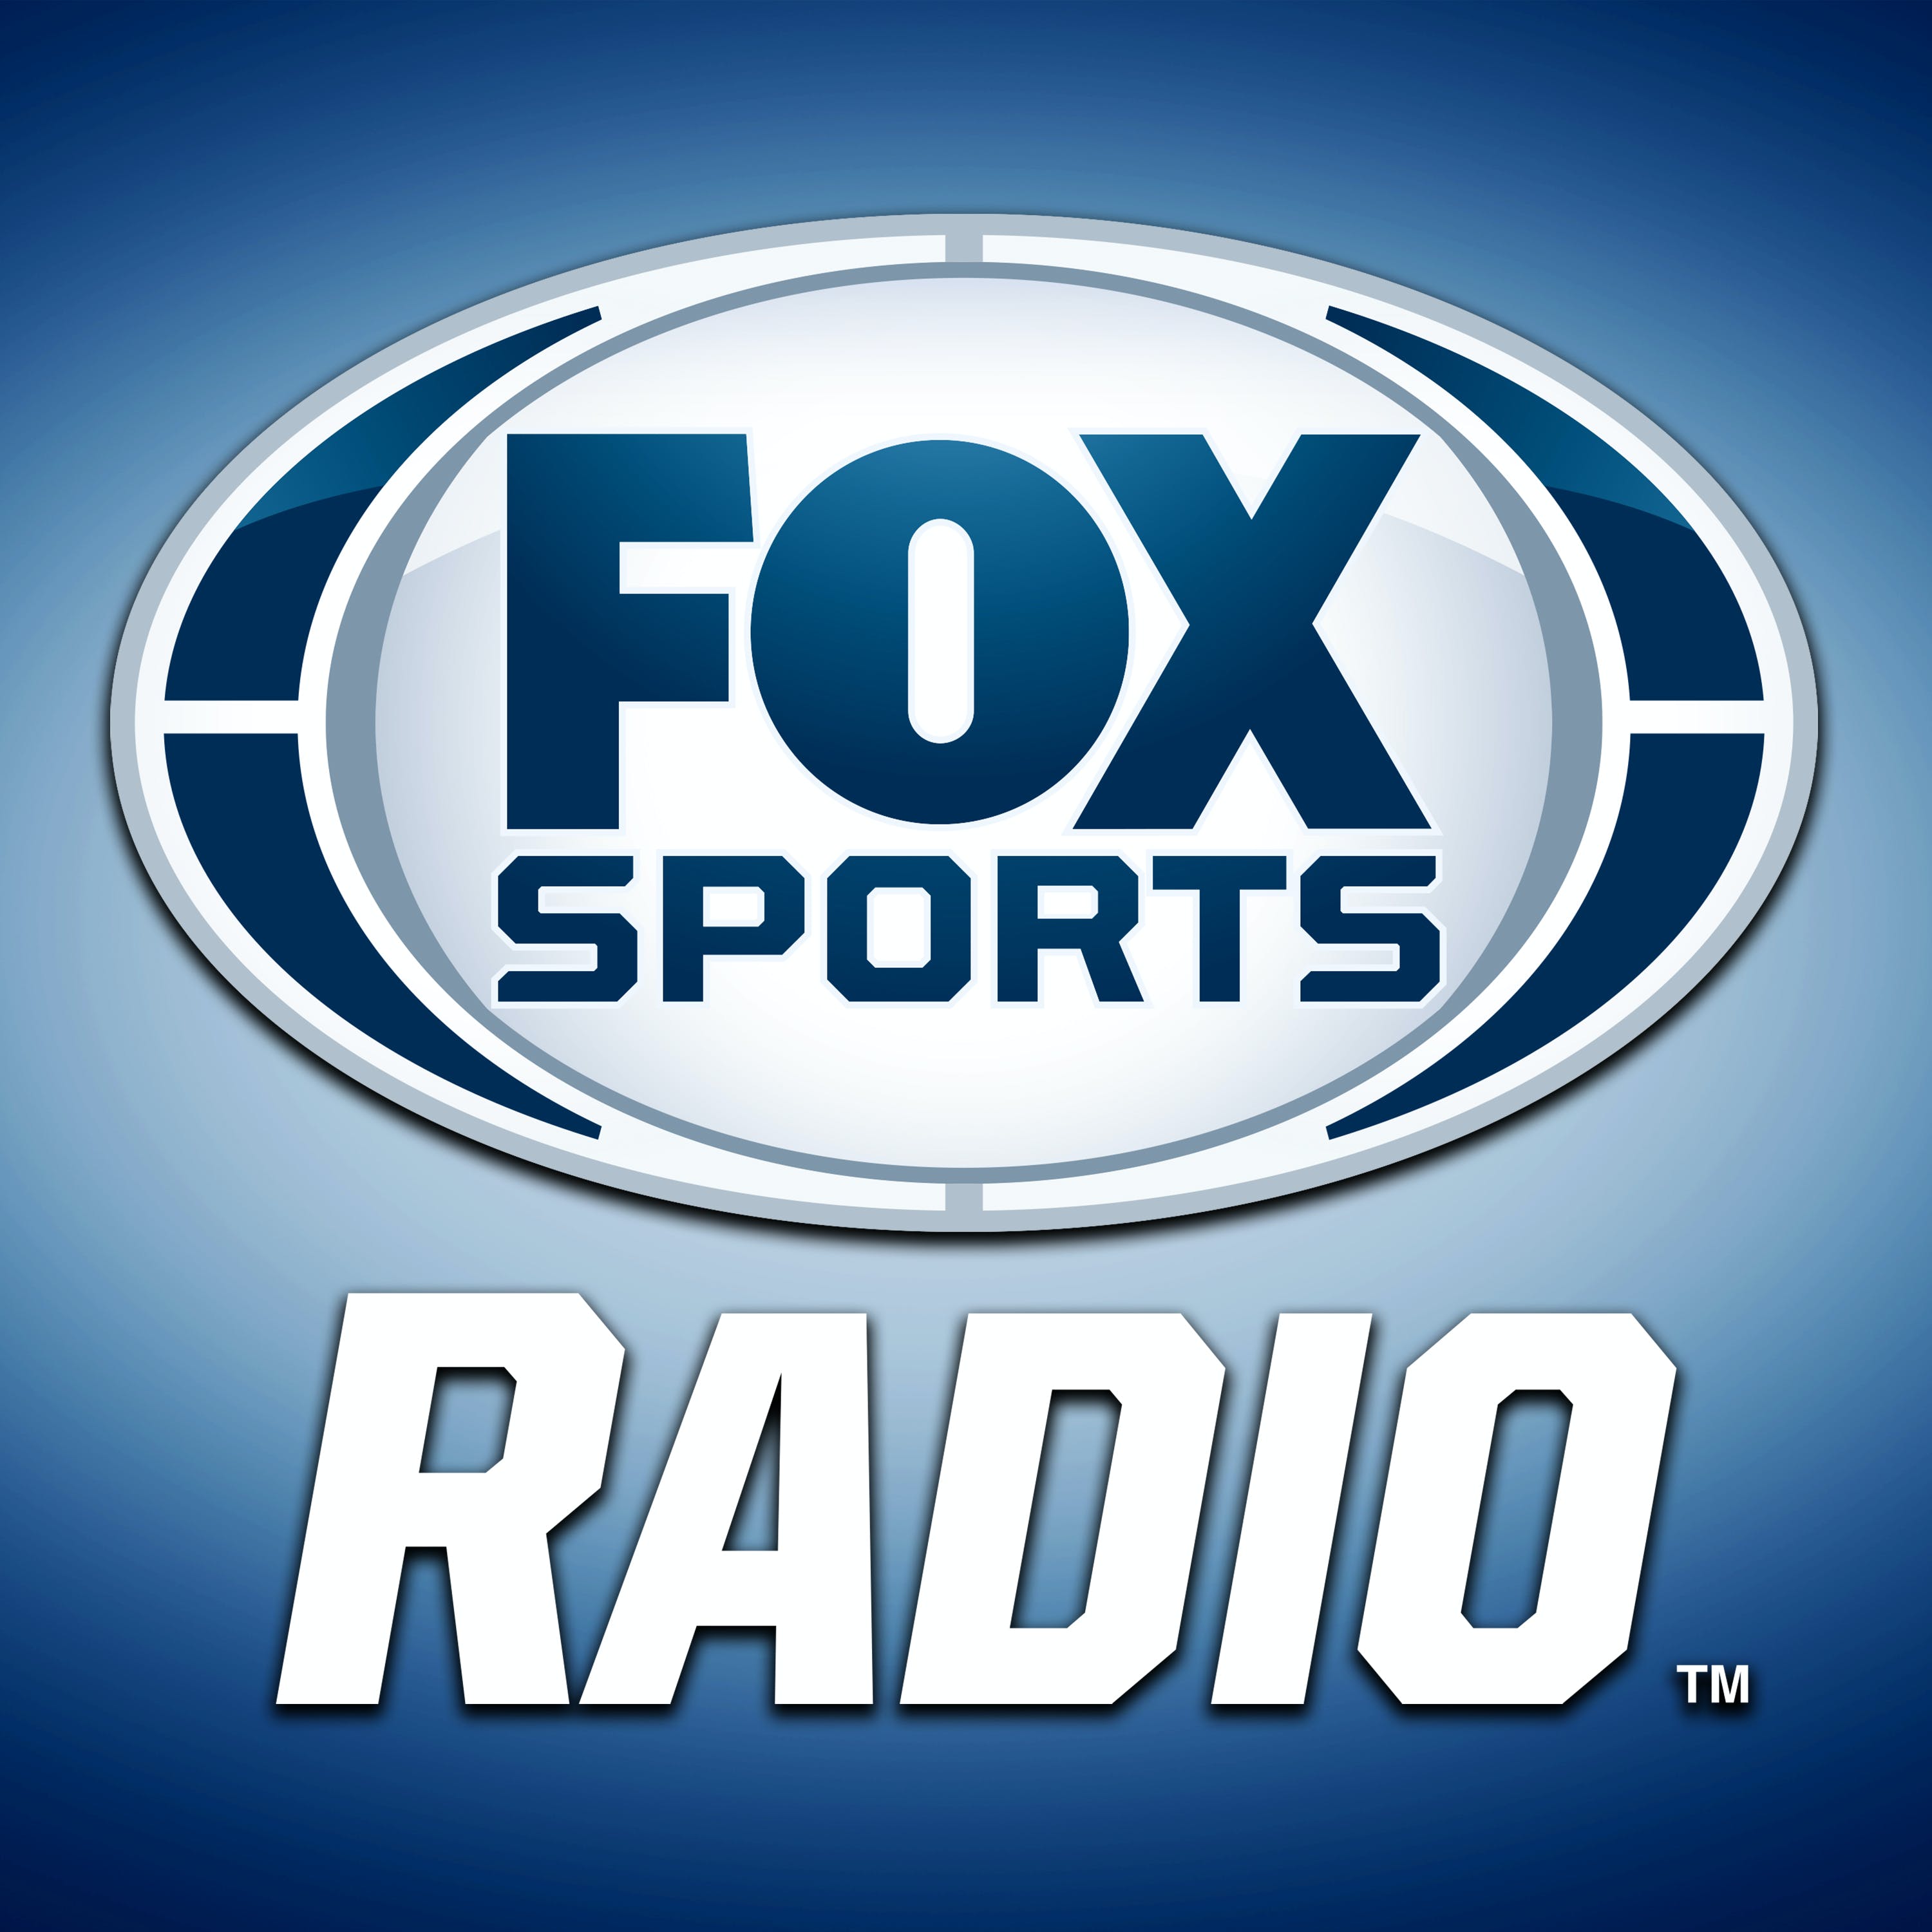 Rich Davis and Steve Covino offer up their Week 2 takeaways and hand out some Fox Sports Emmys!